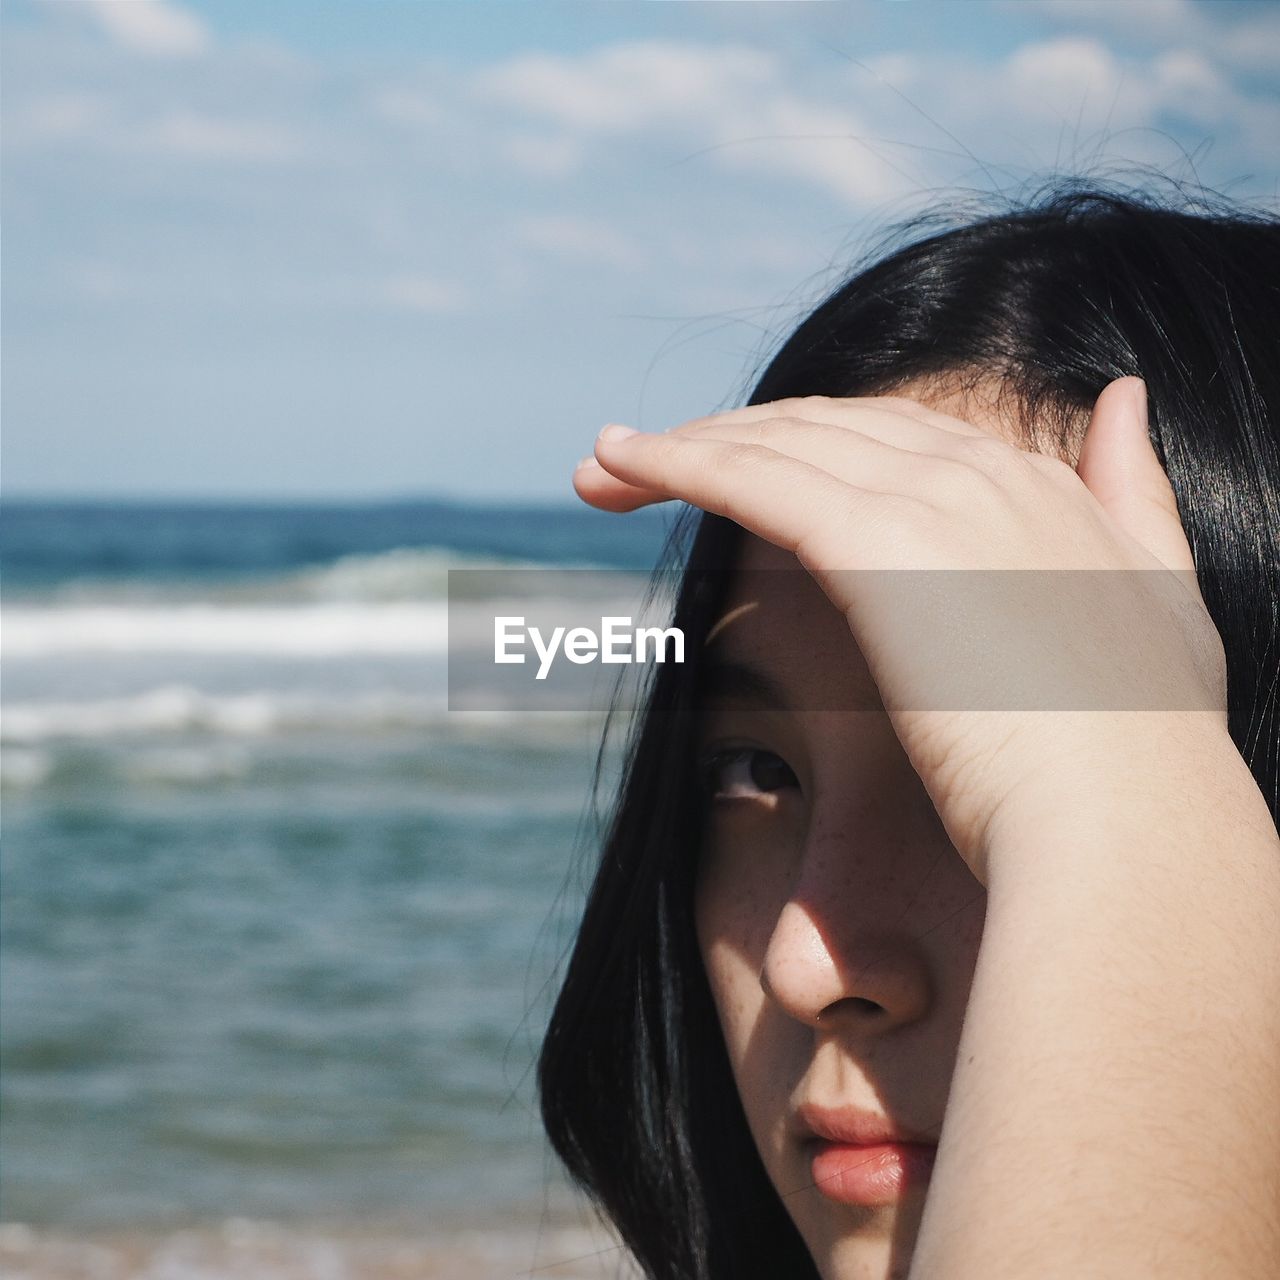 Close-up portrait of woman shielding eyes while standing at beach